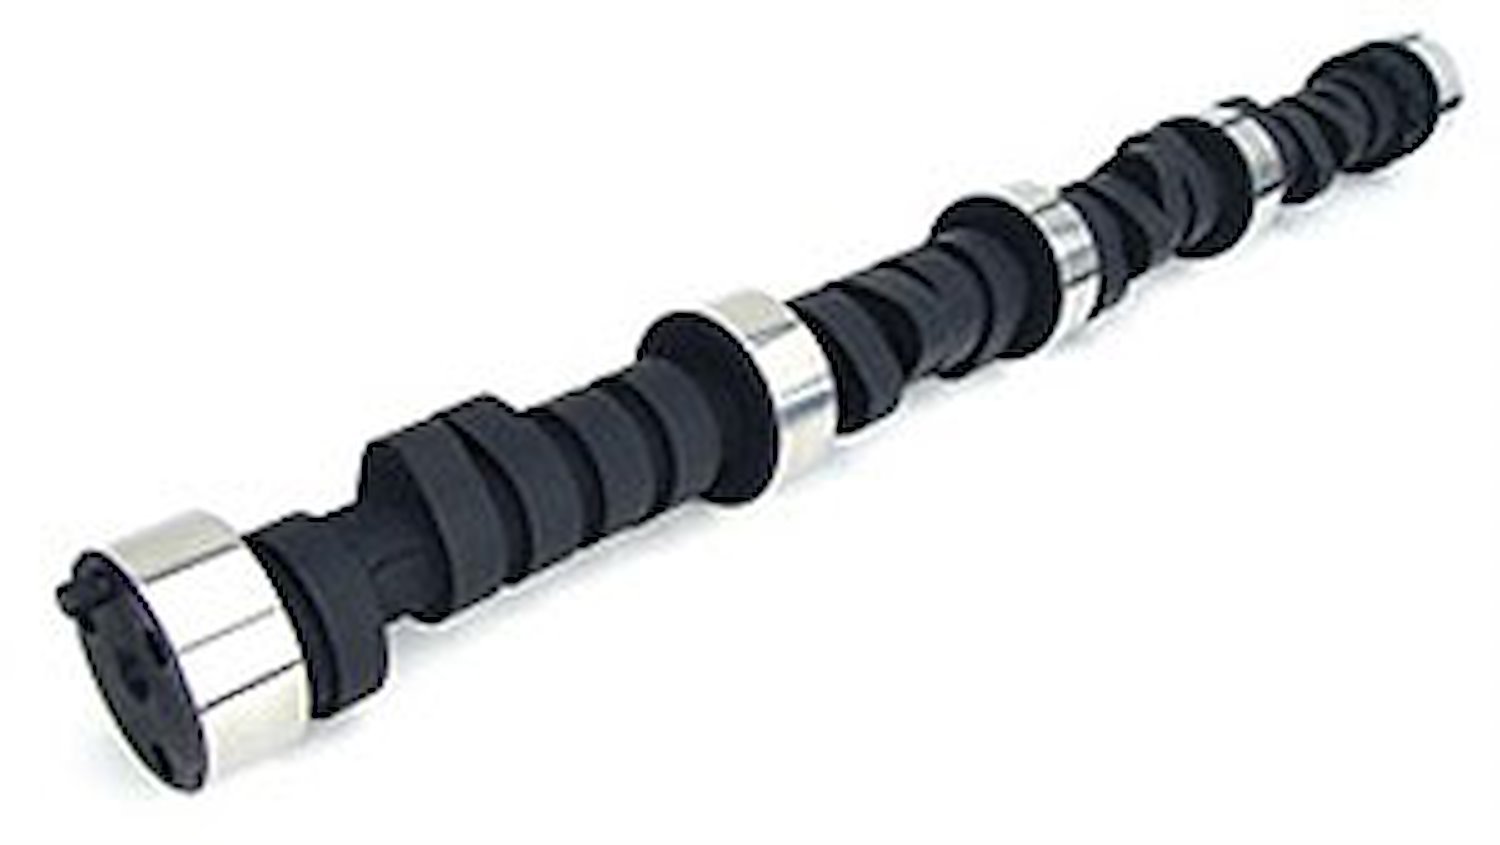 Xtreme Energy 256H Hydraulic Flat Tappet Camshaft Only Lift .480"/.485" Duration 256°/268° RPM Range 1000-5200